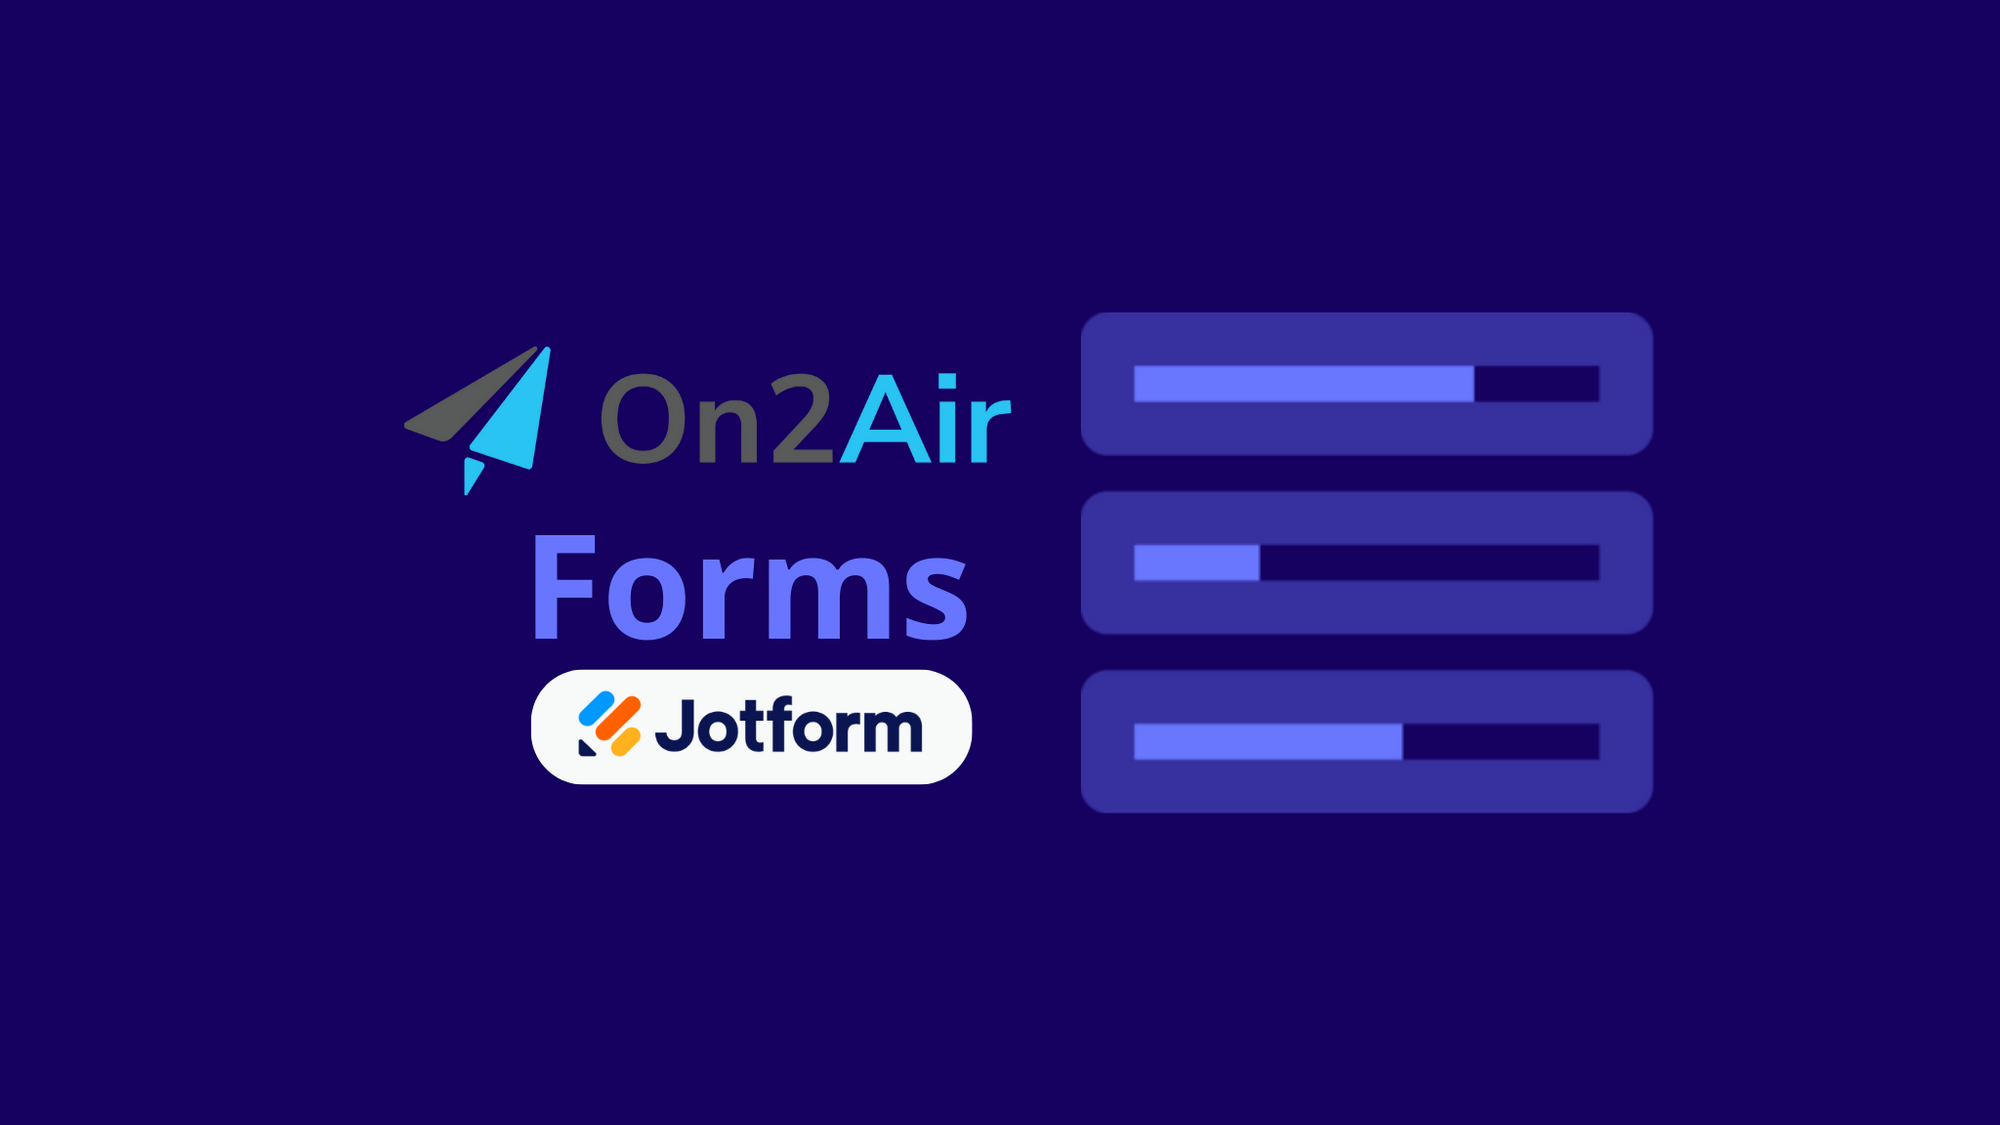 On2Air Forms - JotForm